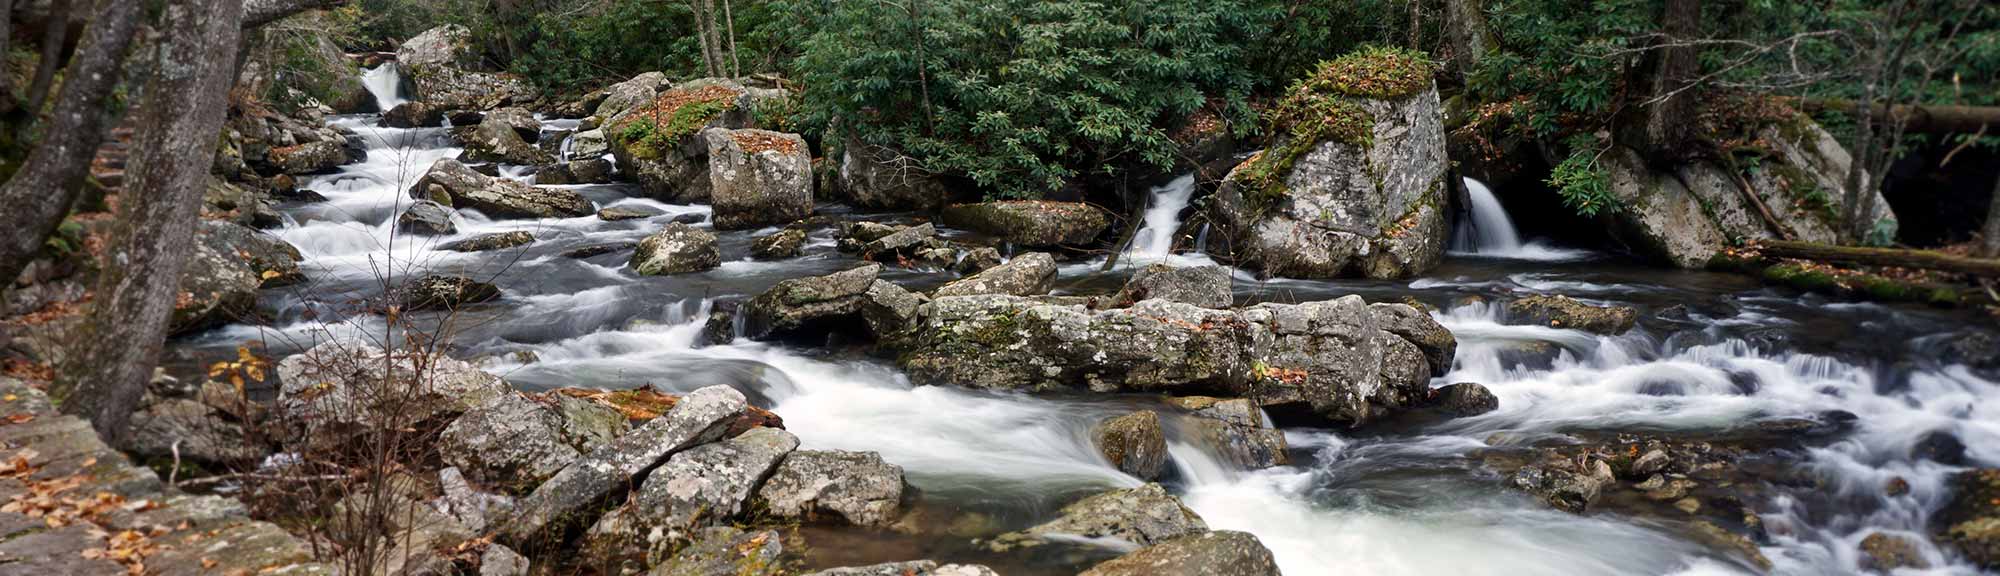 Water rushes through Little Stony Creek in a timelapse panorama photo by President Benson